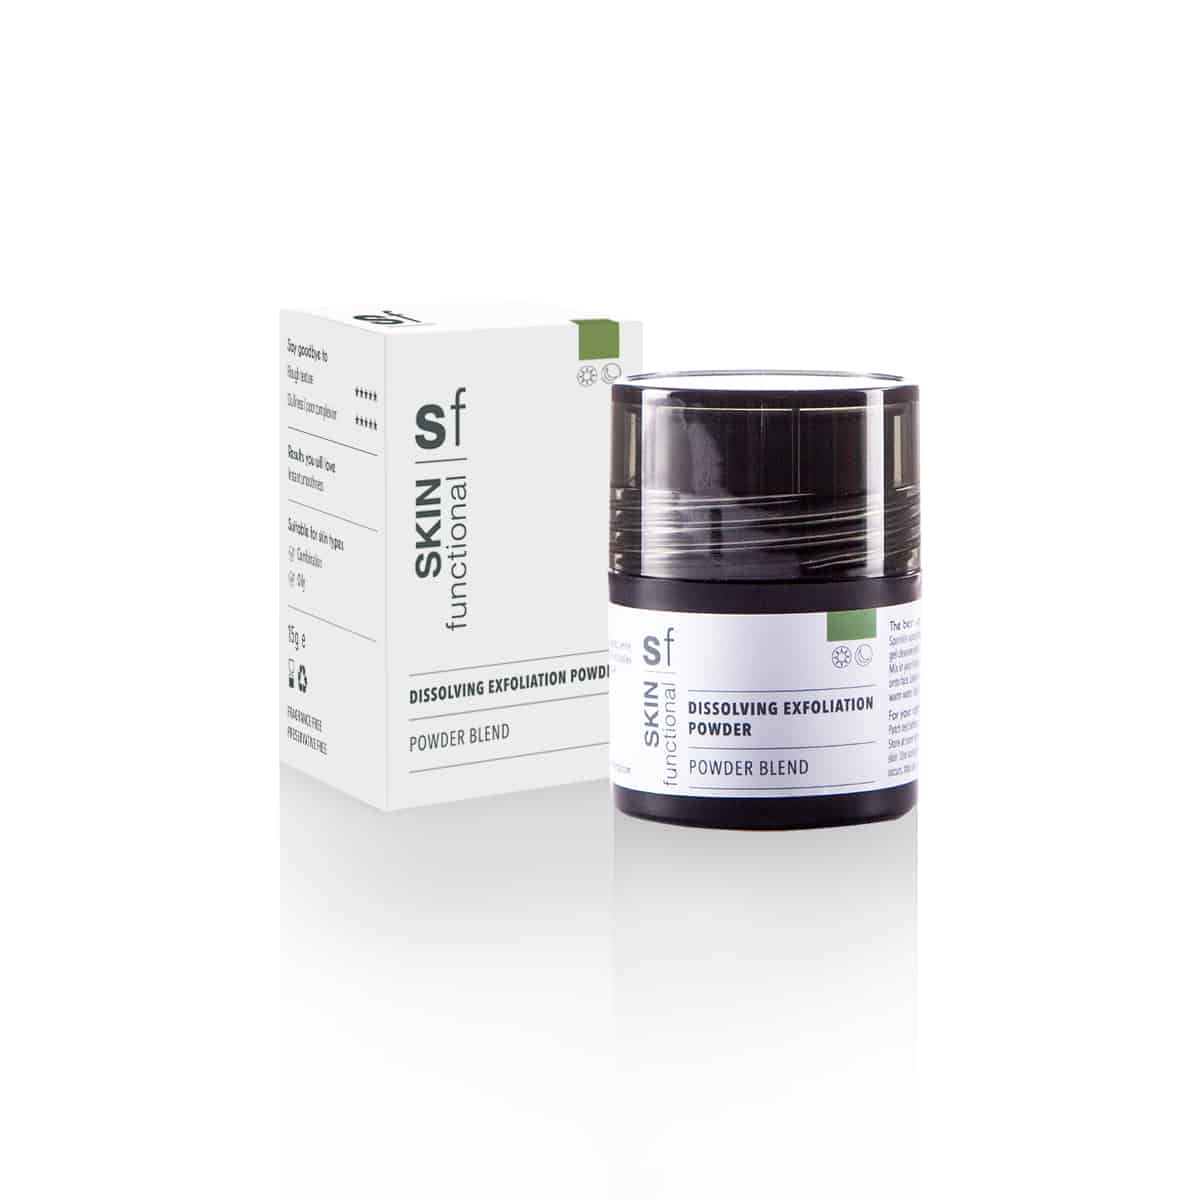 SKIN Functional - Powder Blend - Dissolving Exfoliating 15g, now available in a 50ml size for even more effective results.